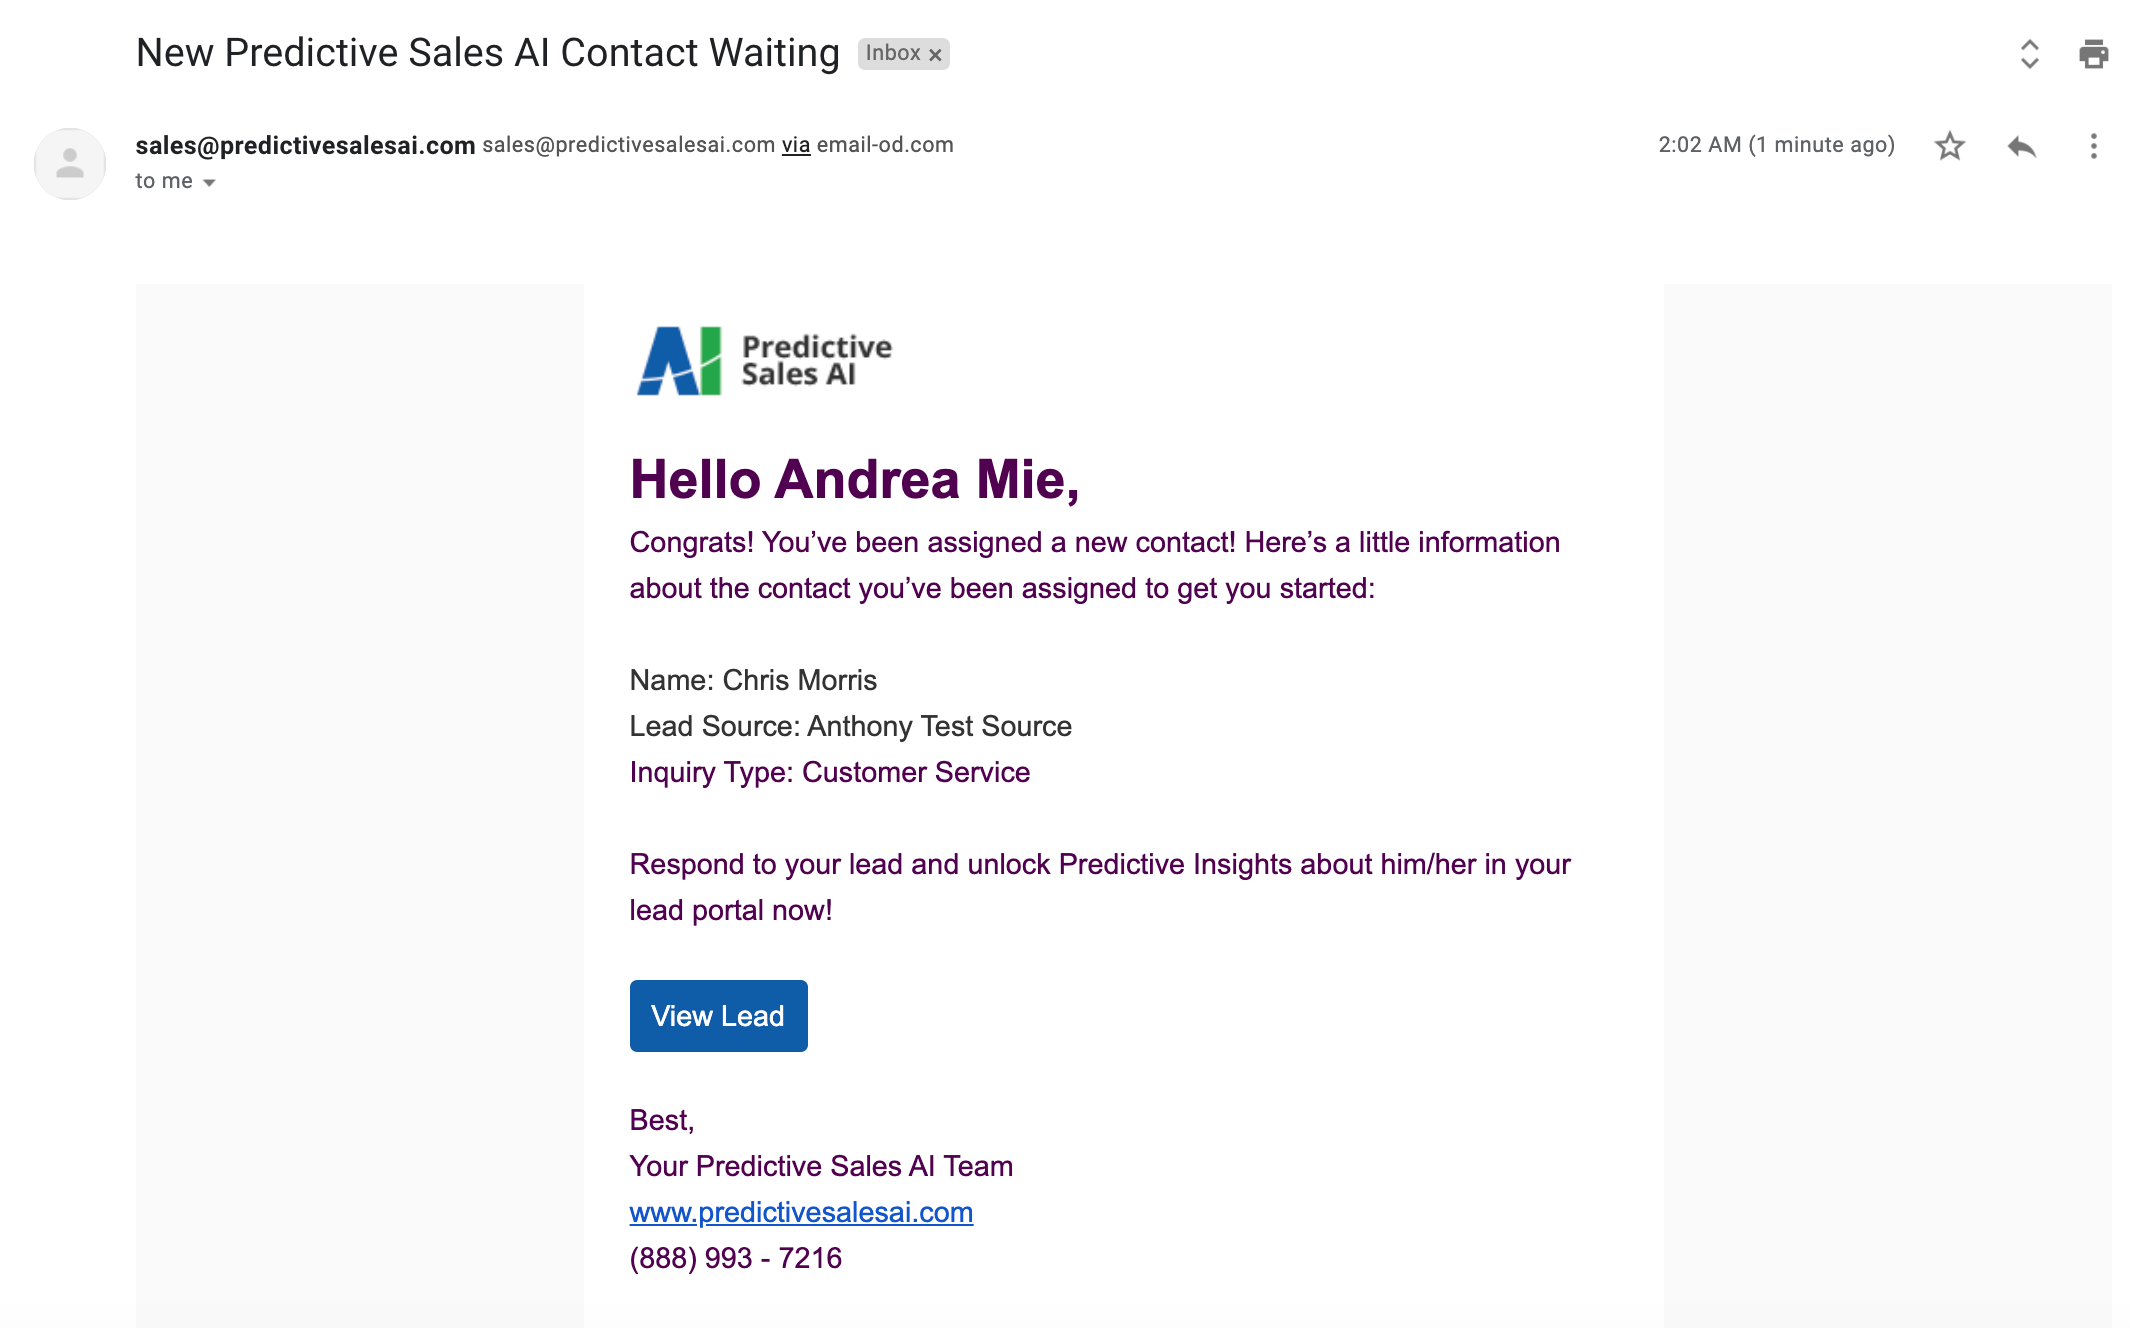 New_predictive_sales_ai_contact_waiting_email_notification.png